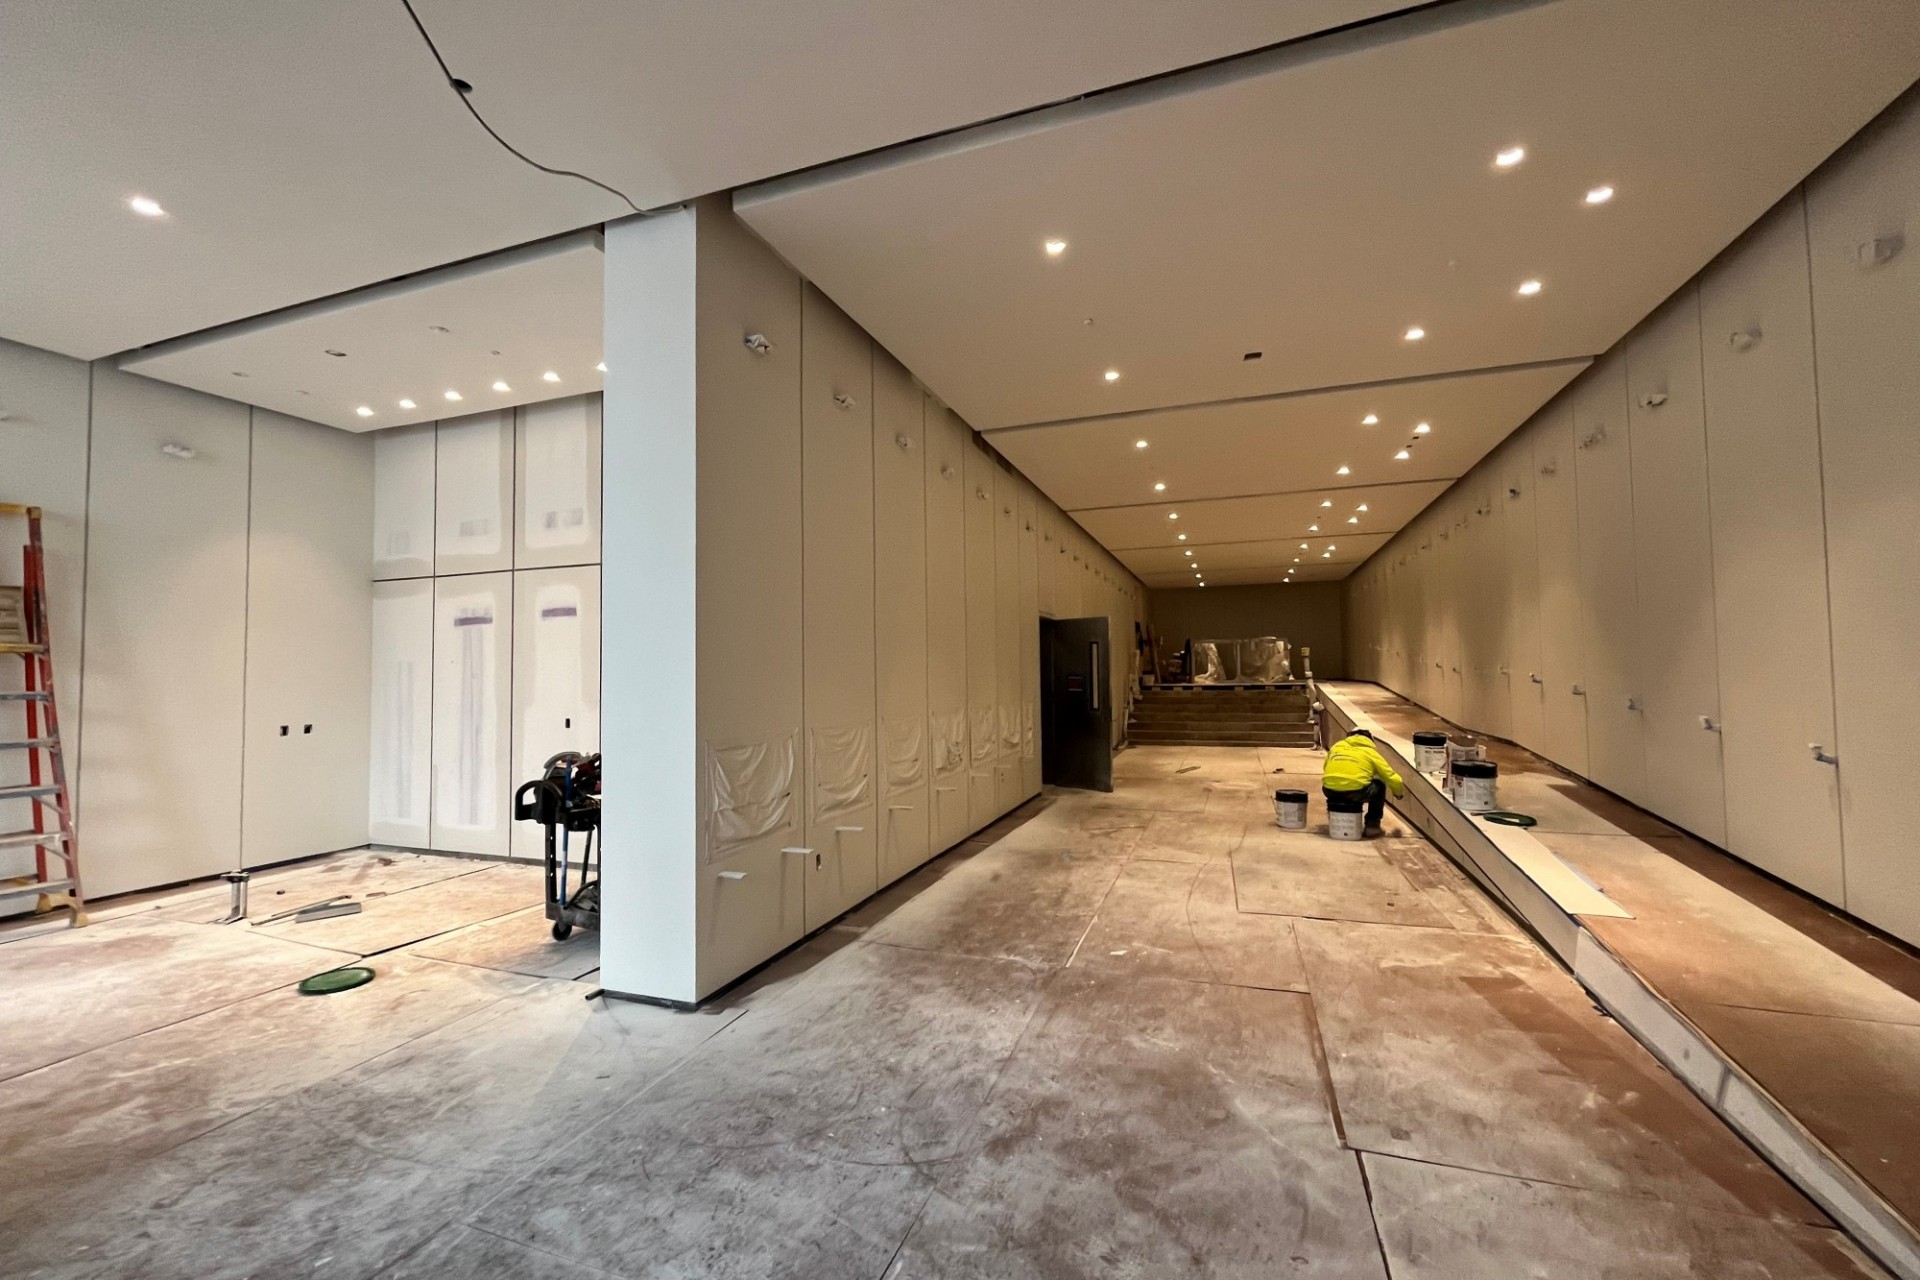 The lobby of 600 W. 125th Street under construction, with new ceiling and wall panels installed.